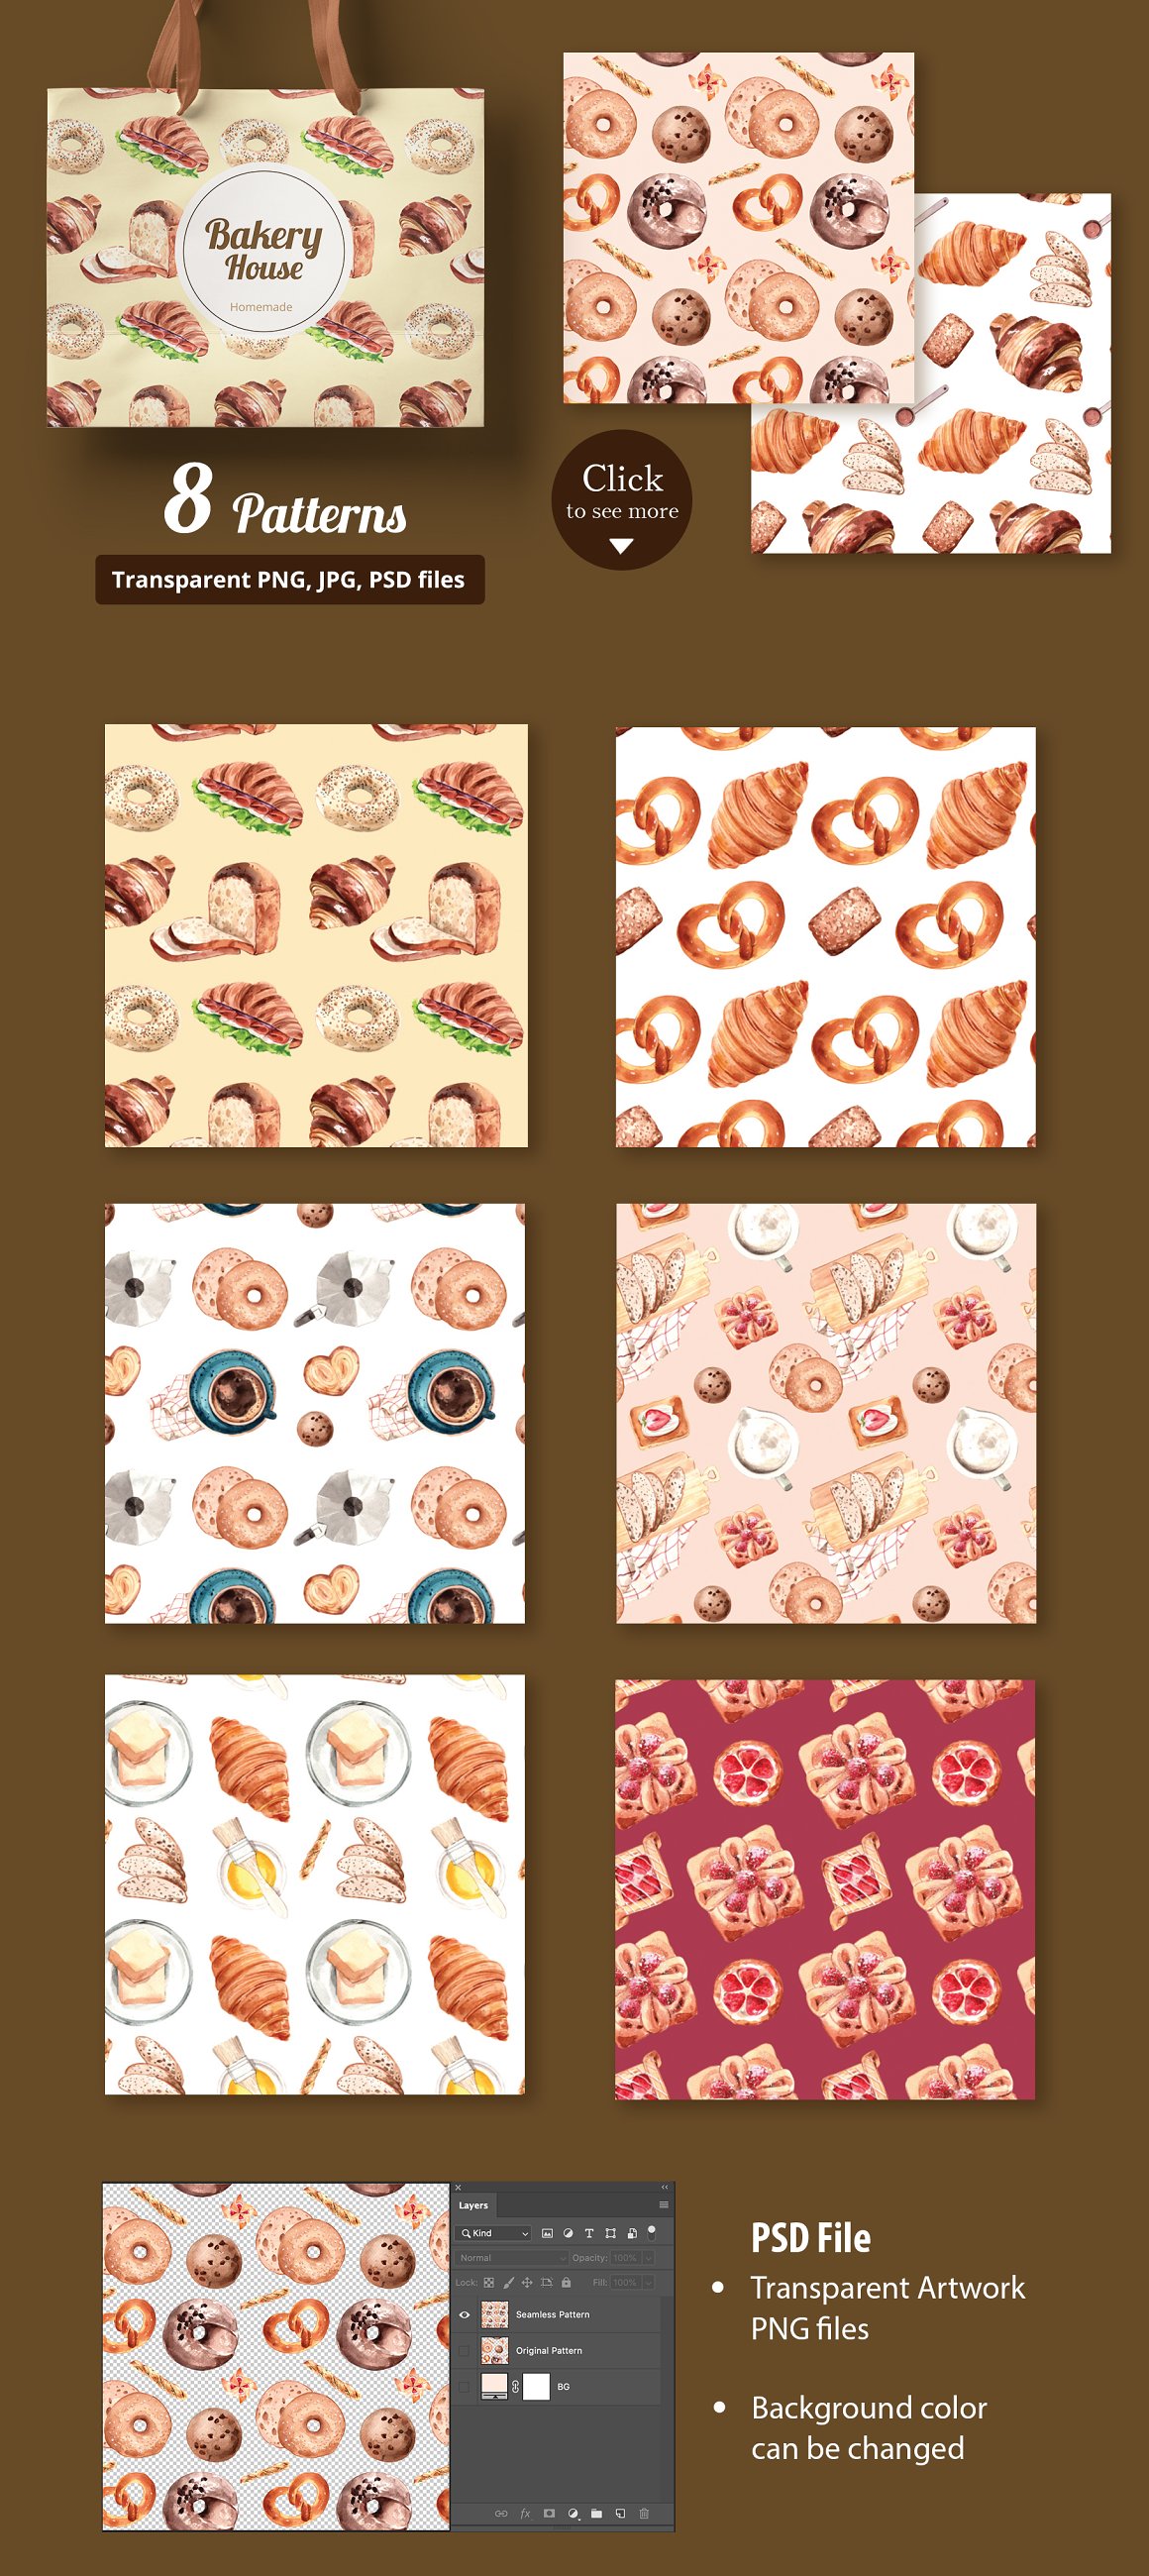 Background pictures with prints with pastries.